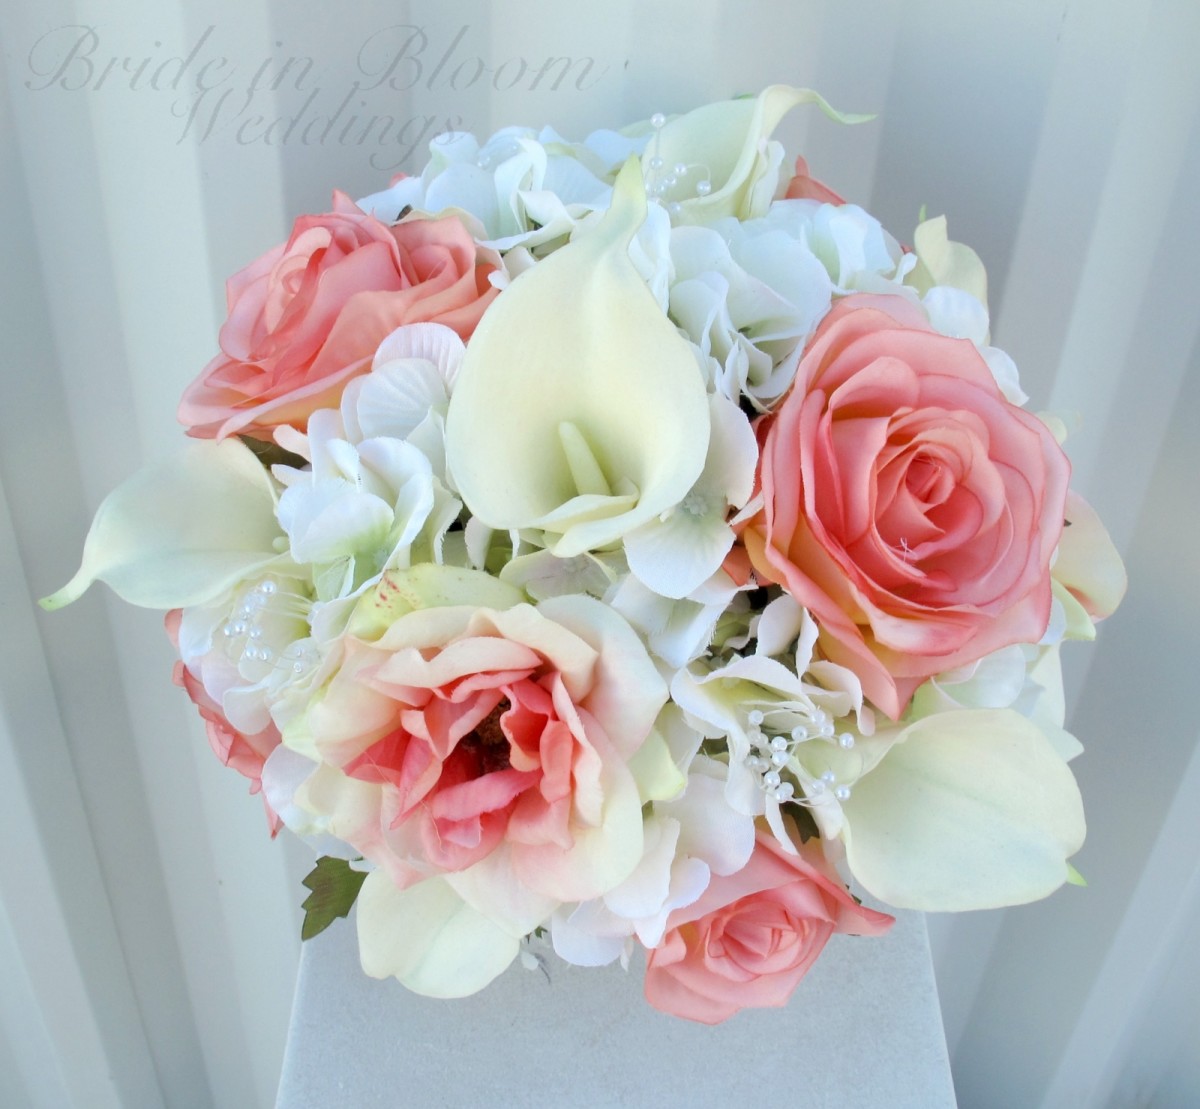 If you want a little color with your calla lily bouquet, add roses for a light touch of color